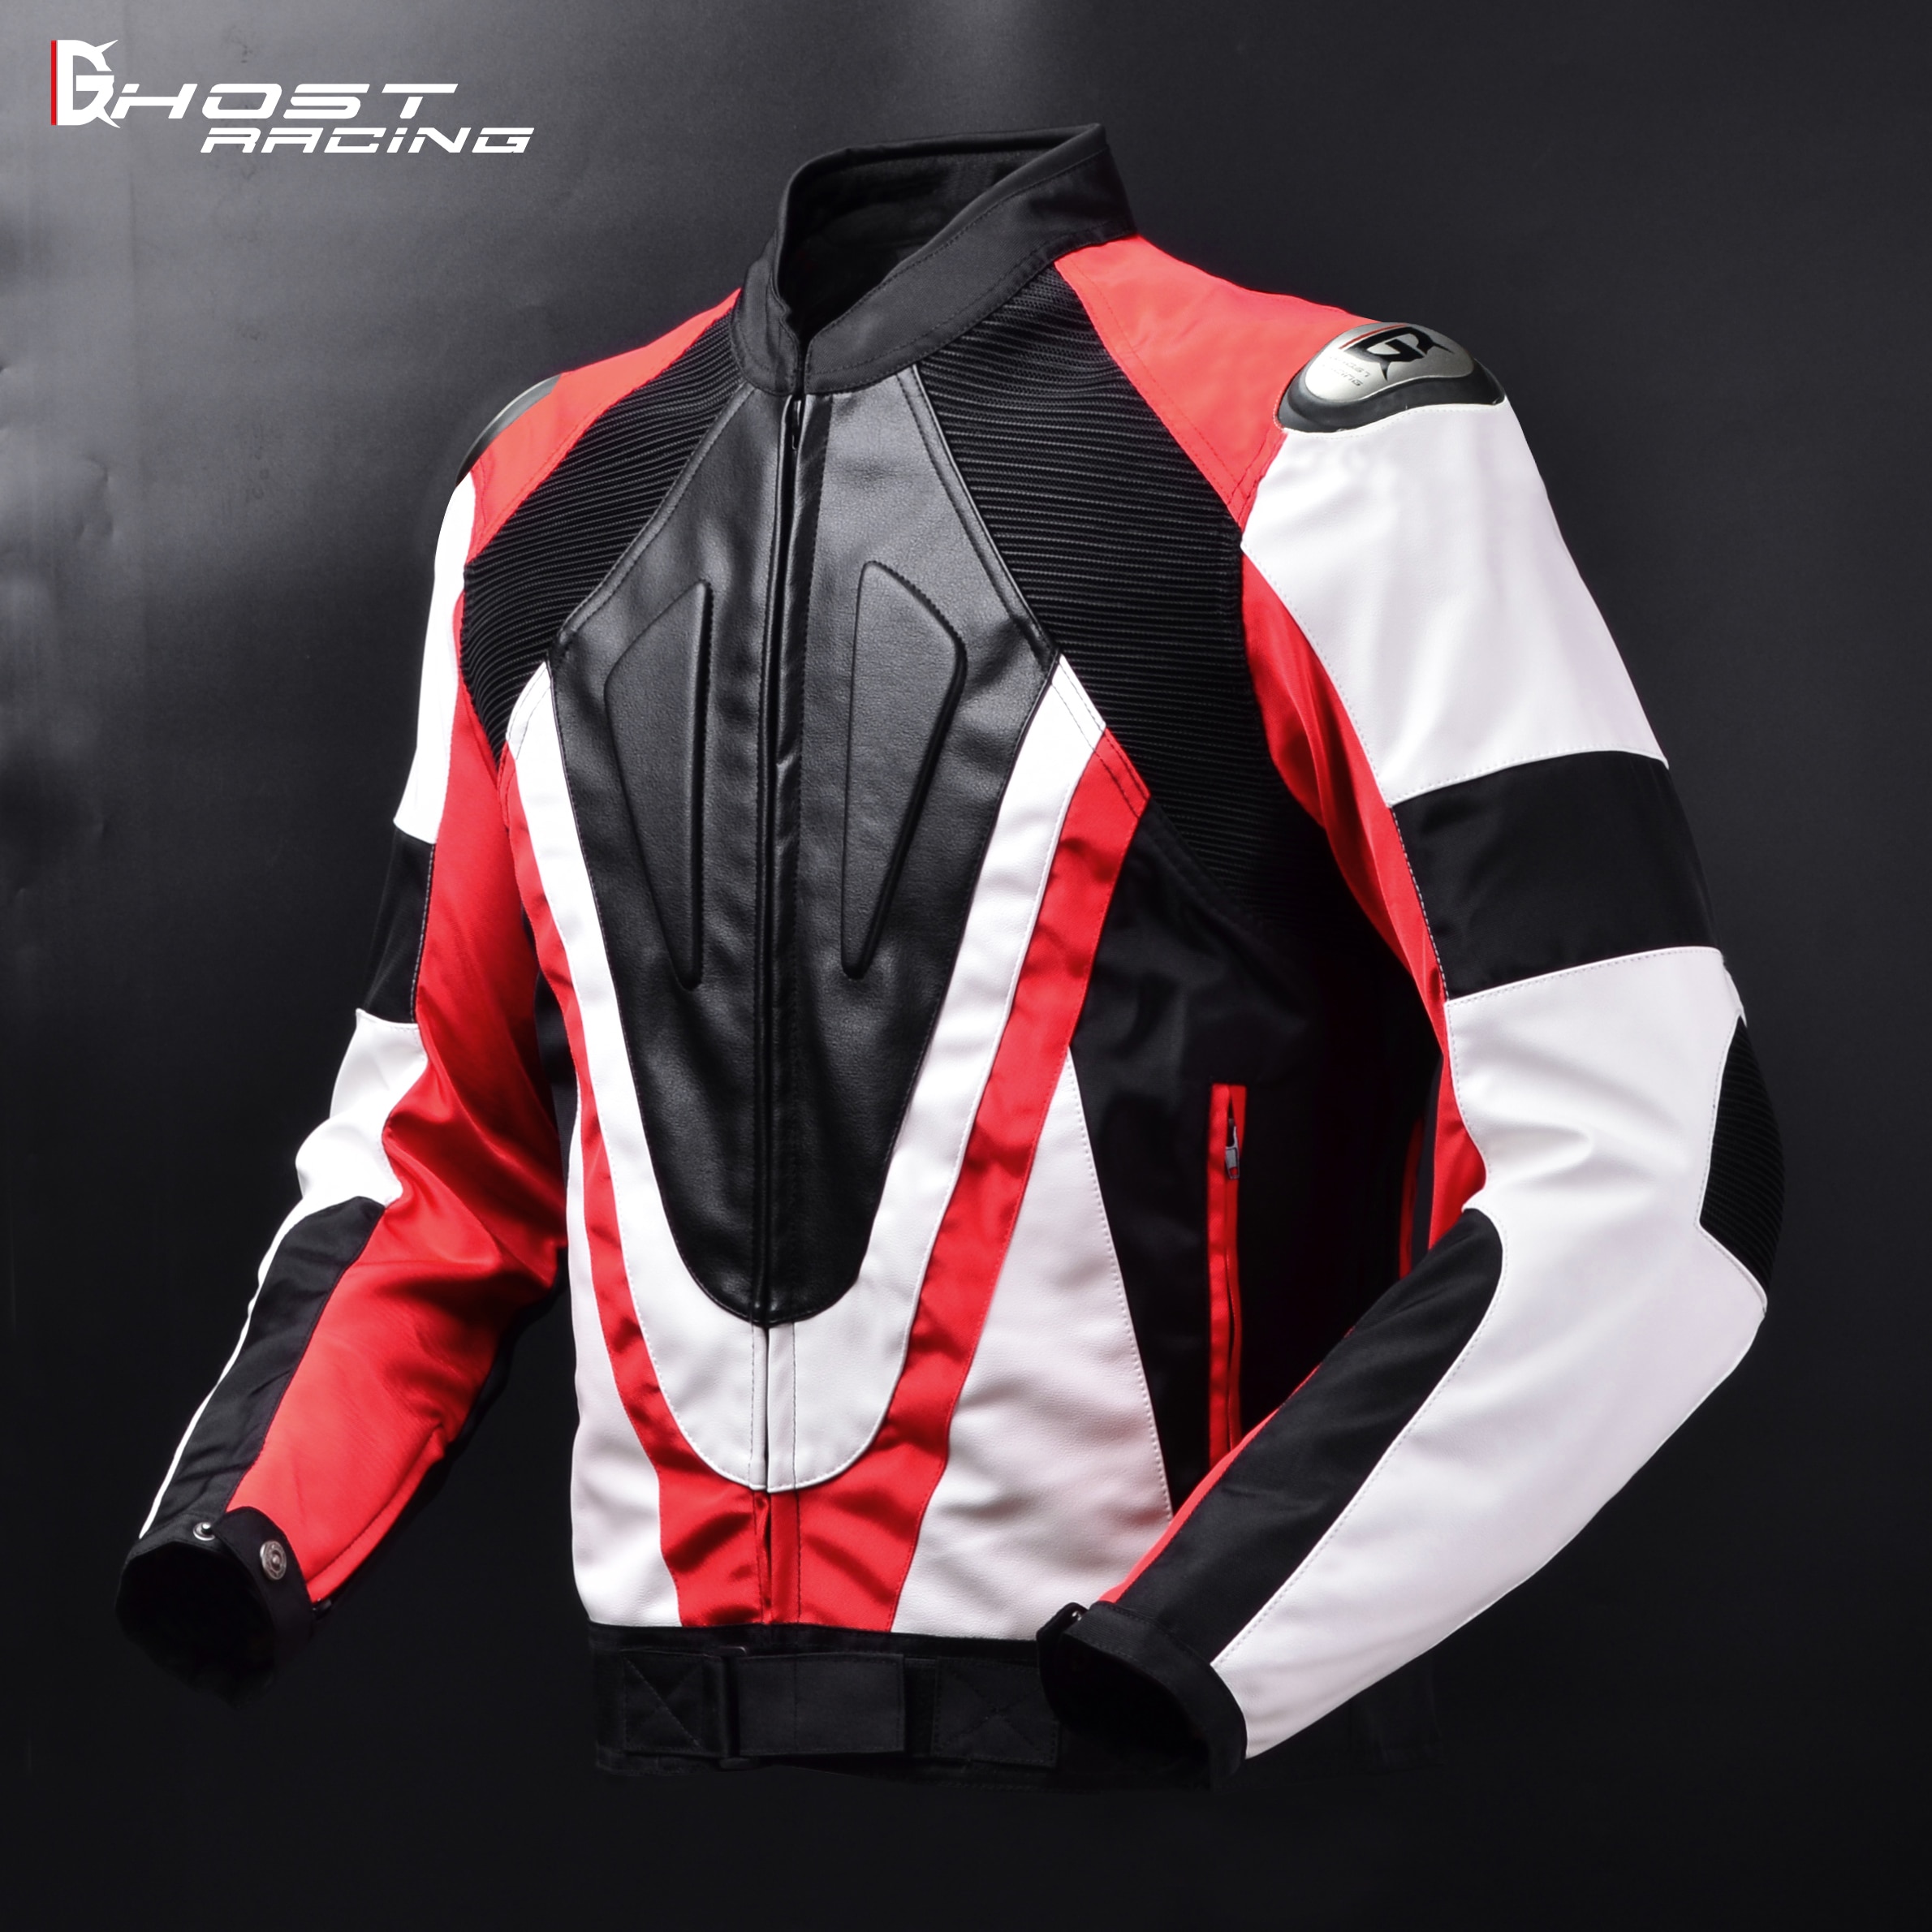 GHOST-RACING-motorcycle-riding-jacket-clothing-anti-fall-leather-sports-suit-motorcycle-jacket